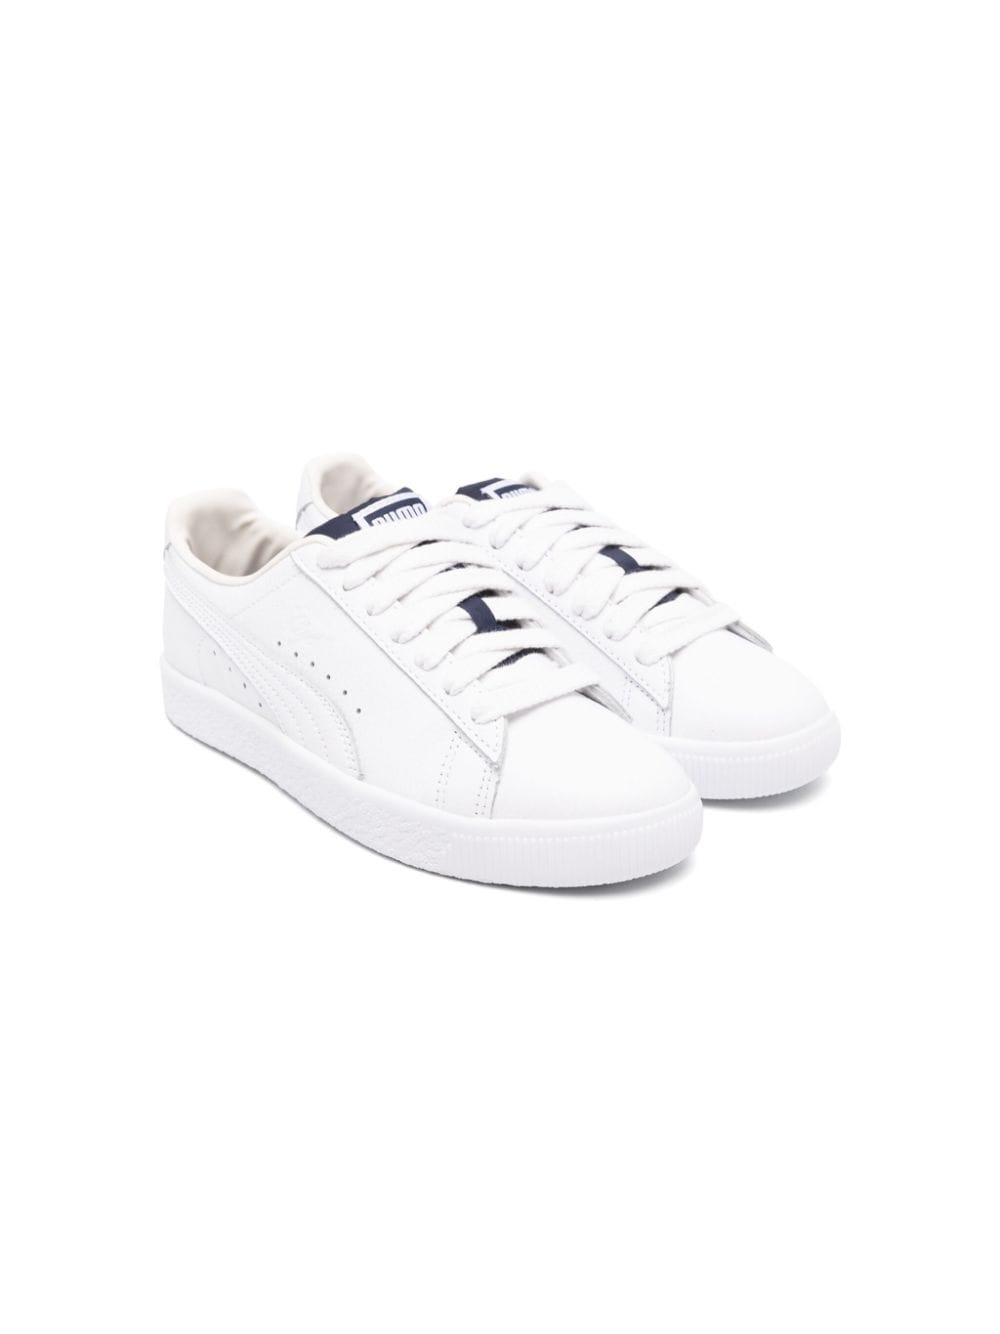 Puma Kids' Clyde Varsity Ii Leather Sneakers In White